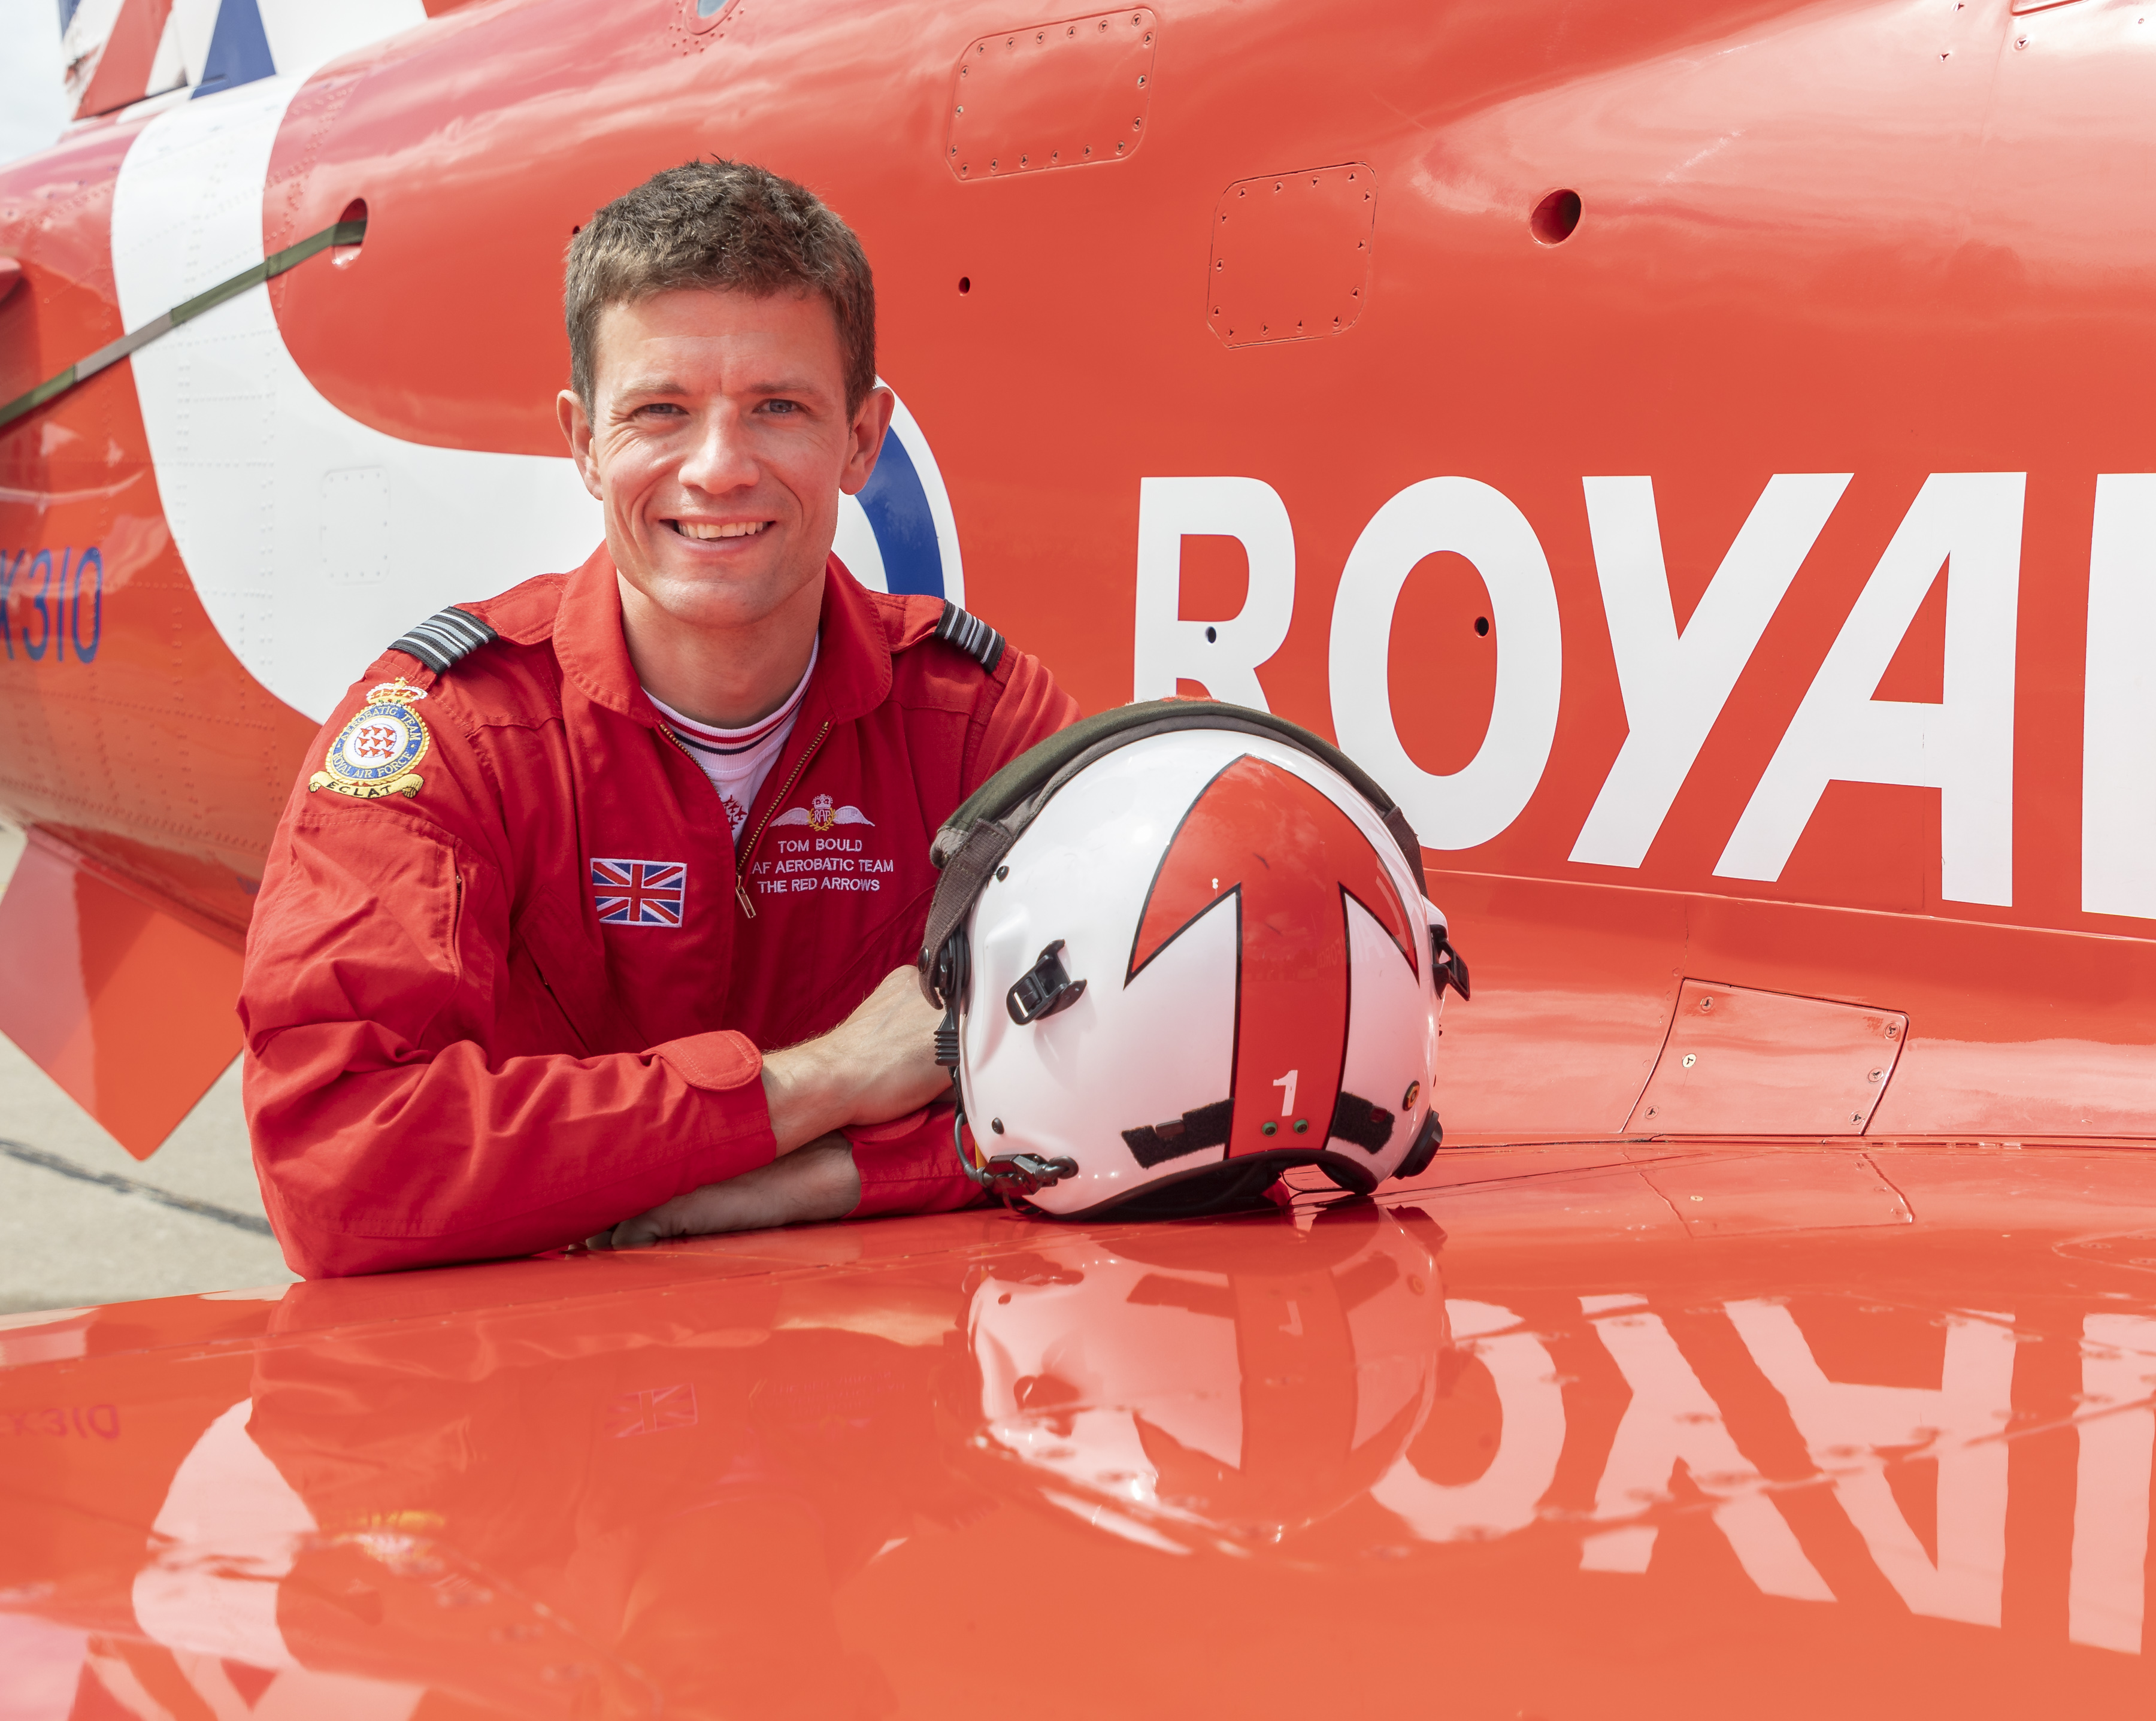 Red 1 - Squadron Leader Tom Bould.